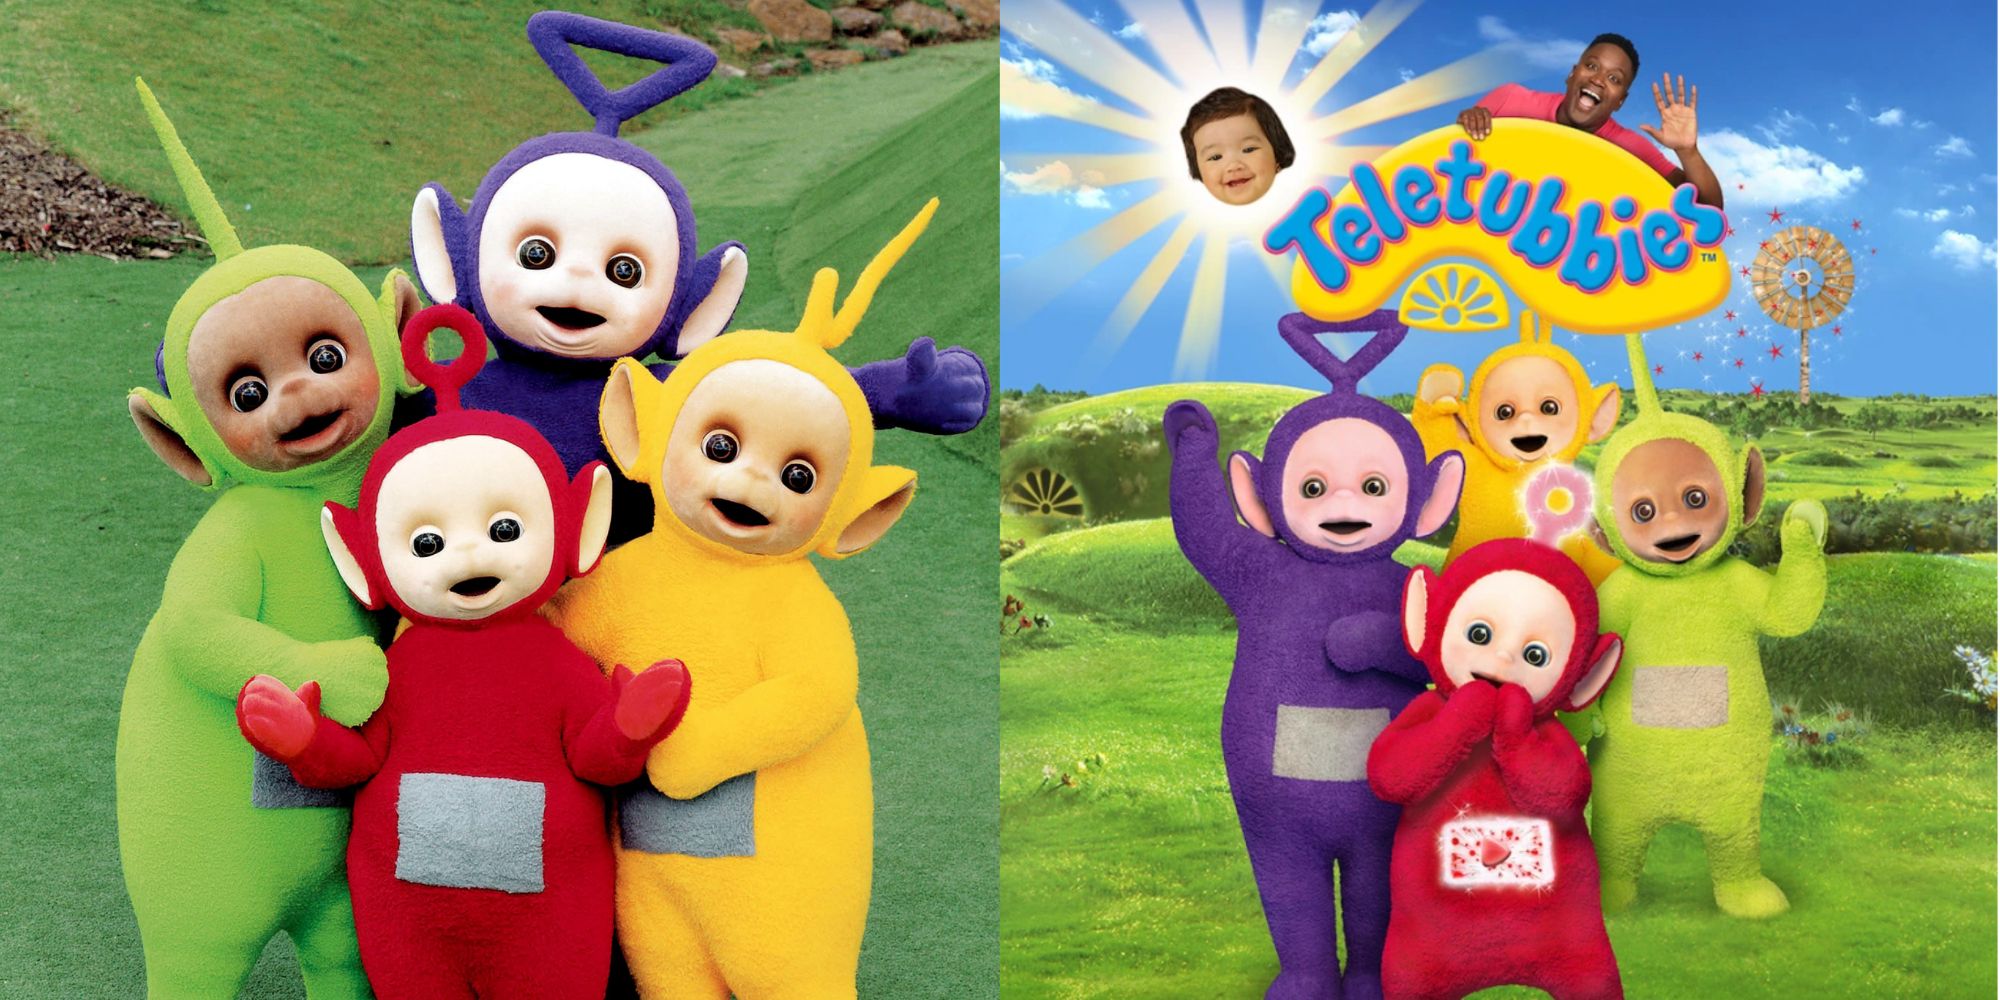 New Teletubbies Costumes Adult Cute Carnival Party Anime Teletubbie For  Women Men Funny Halloween Costume Show Dress - Cosplay Costumes - AliExpress